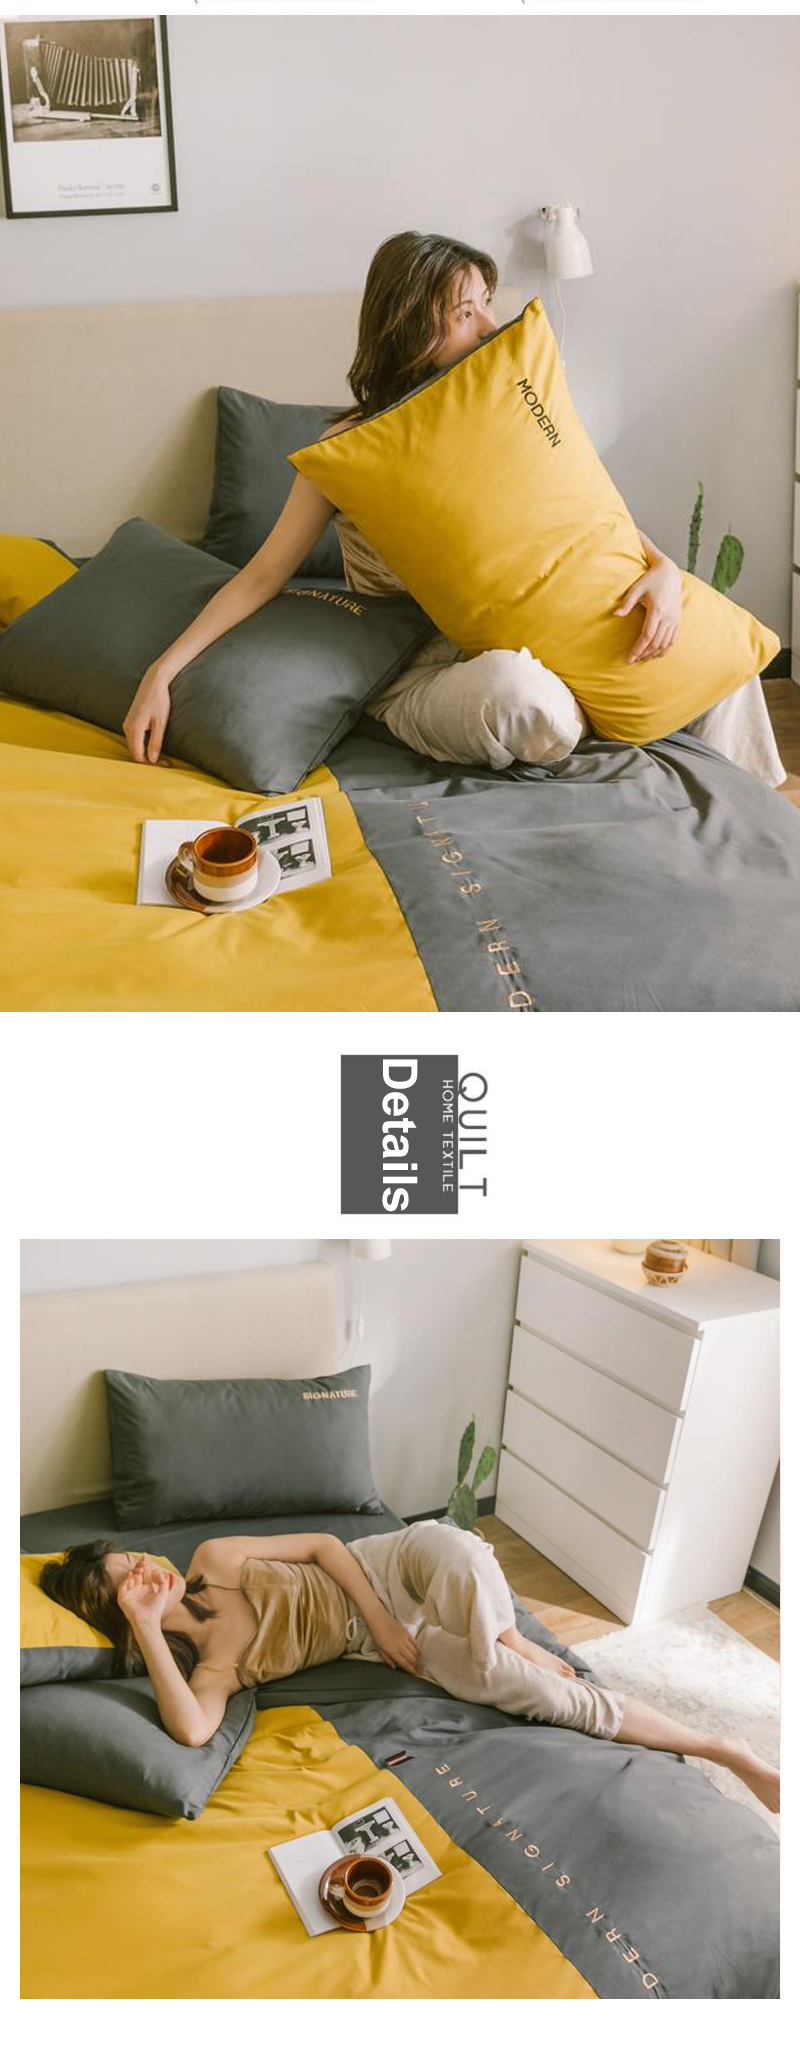 Solid Color Bed Sheets For Apartment